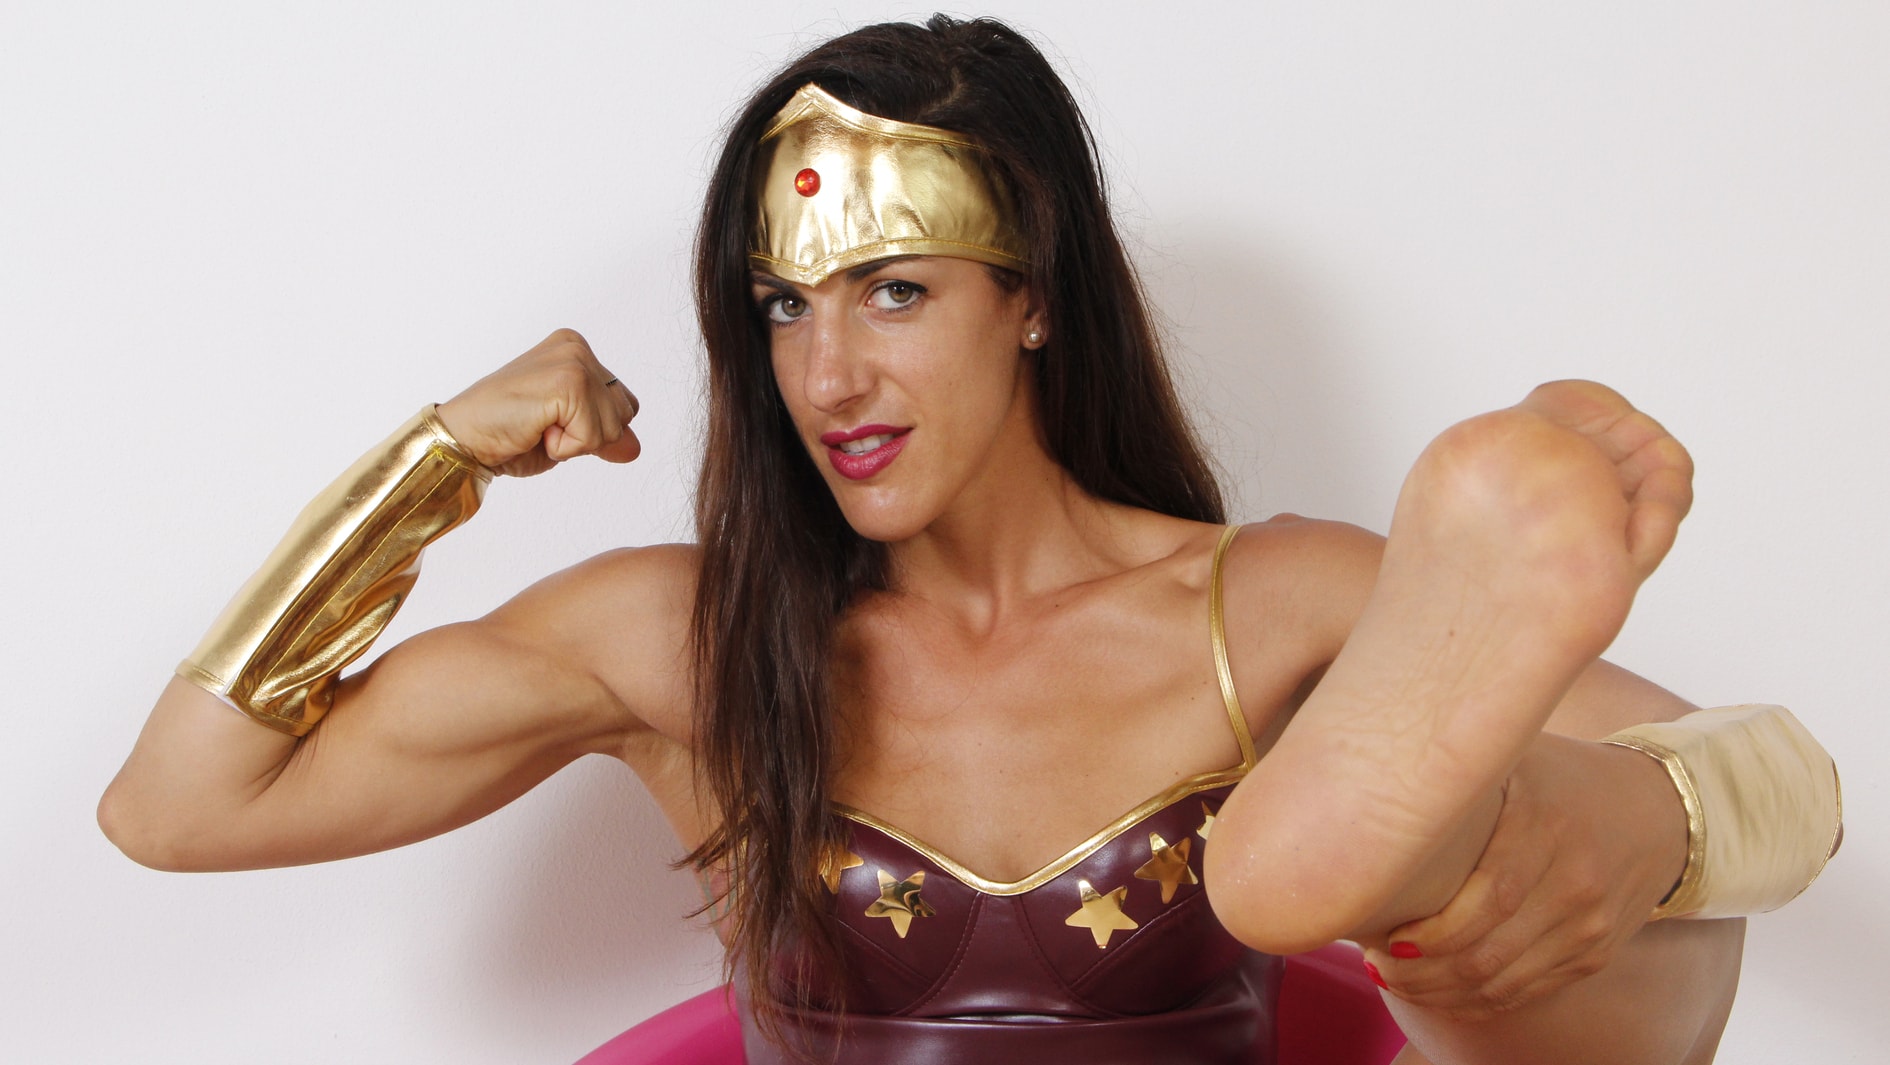 Wonder Woman Foot Fetish Porn - CosplayFeet - Movies - Foot Fetish Cosplay pictures and videos: the best  Cosplayers, the sexiest feet